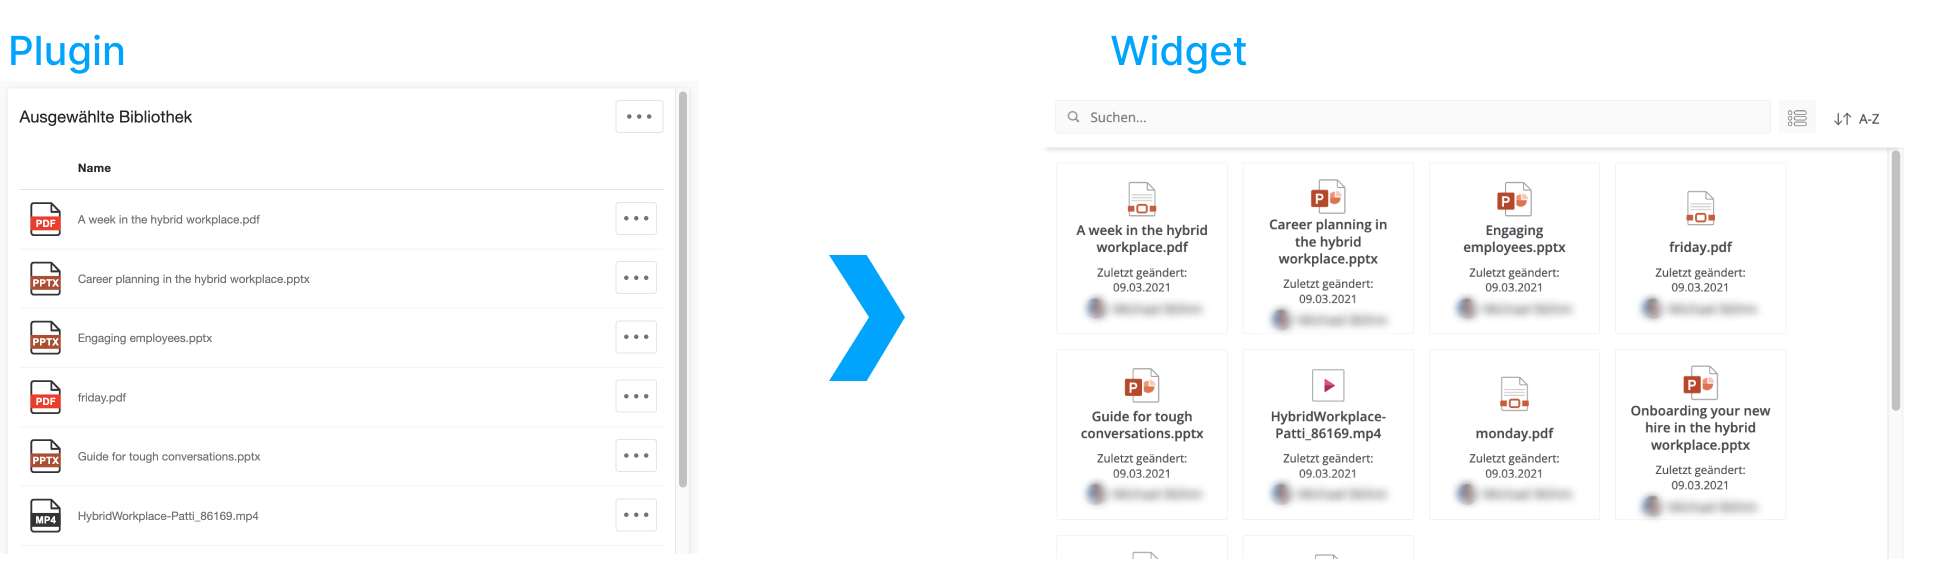 msfiles-widget-recommendation.png